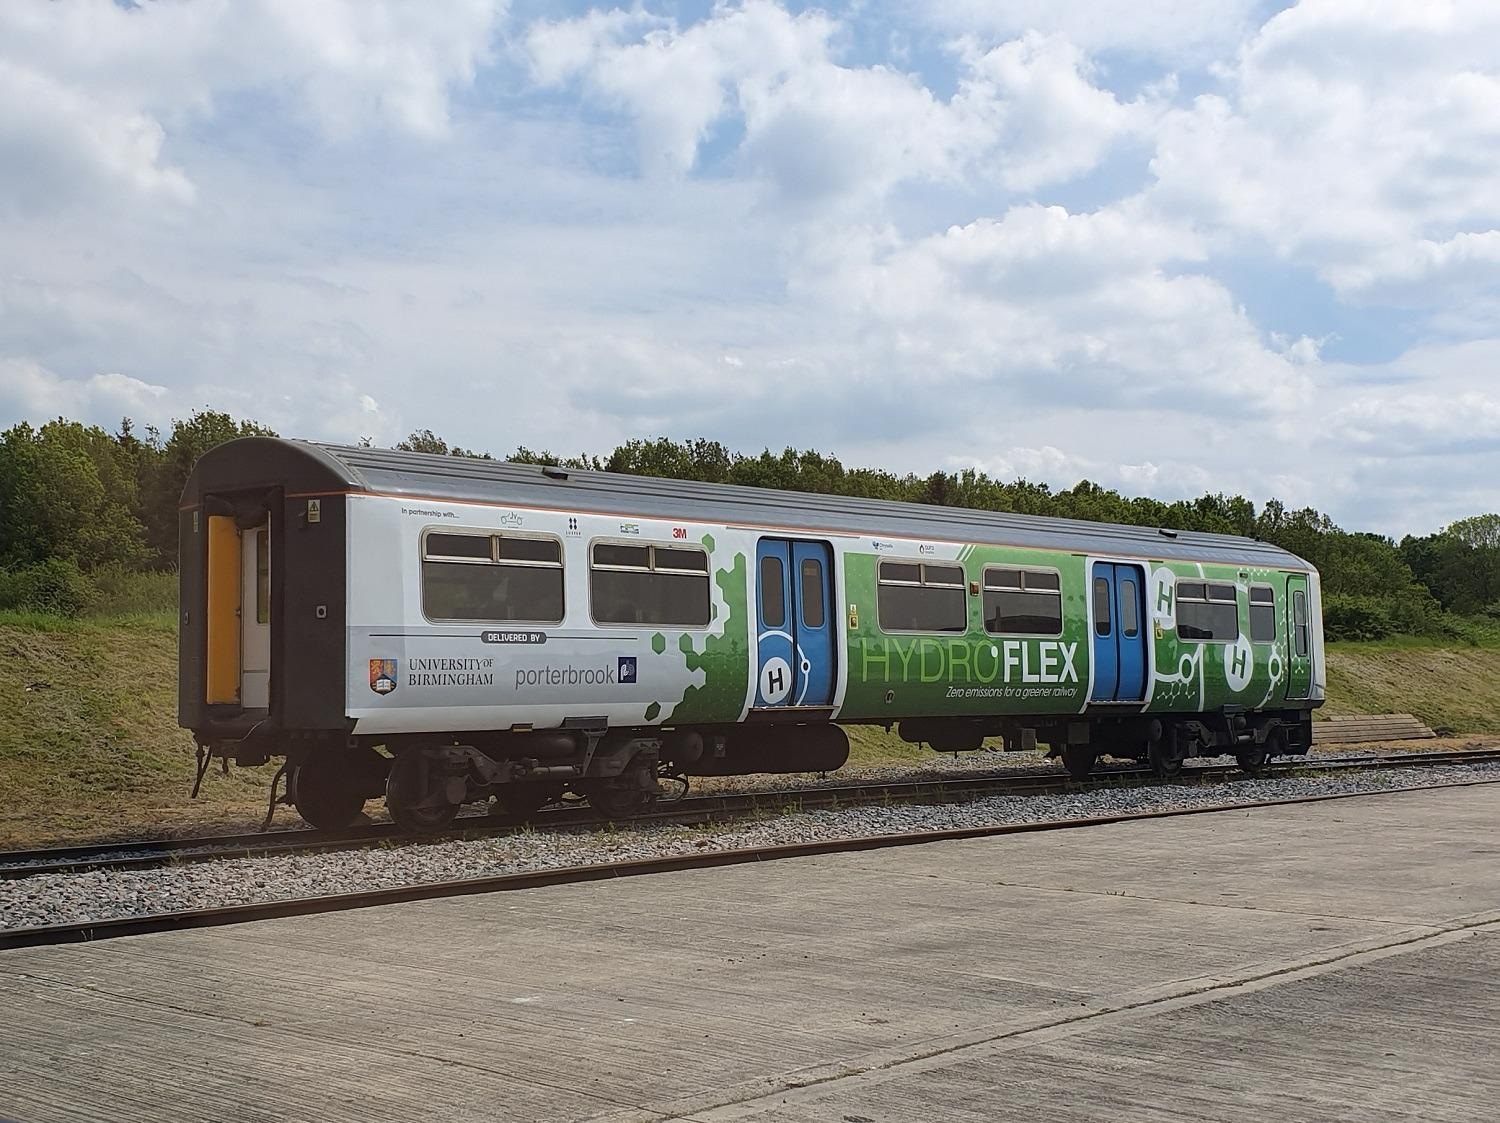 Proud Moment for Luxfer as UK’s First Hydrogen Train to be Showcased on Global Stage at COP26